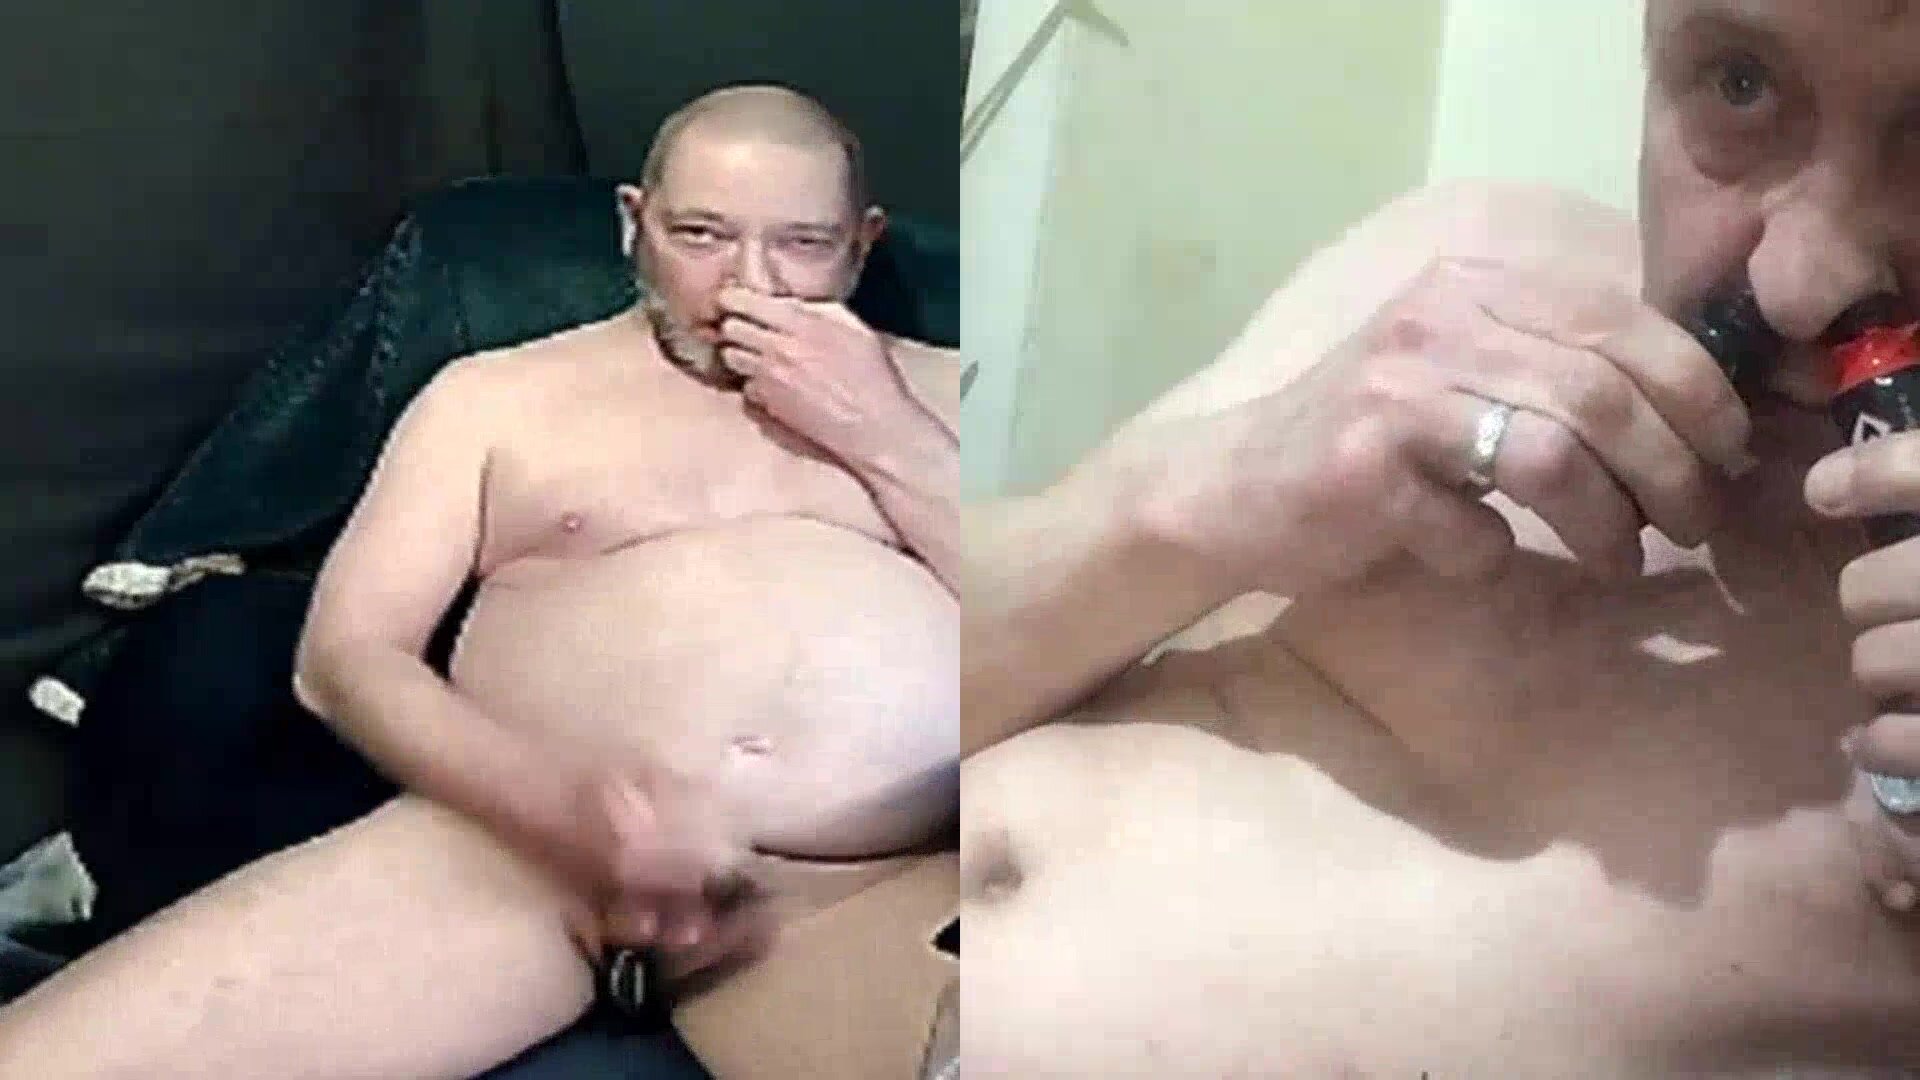 Popperbated again with another buddy on cam